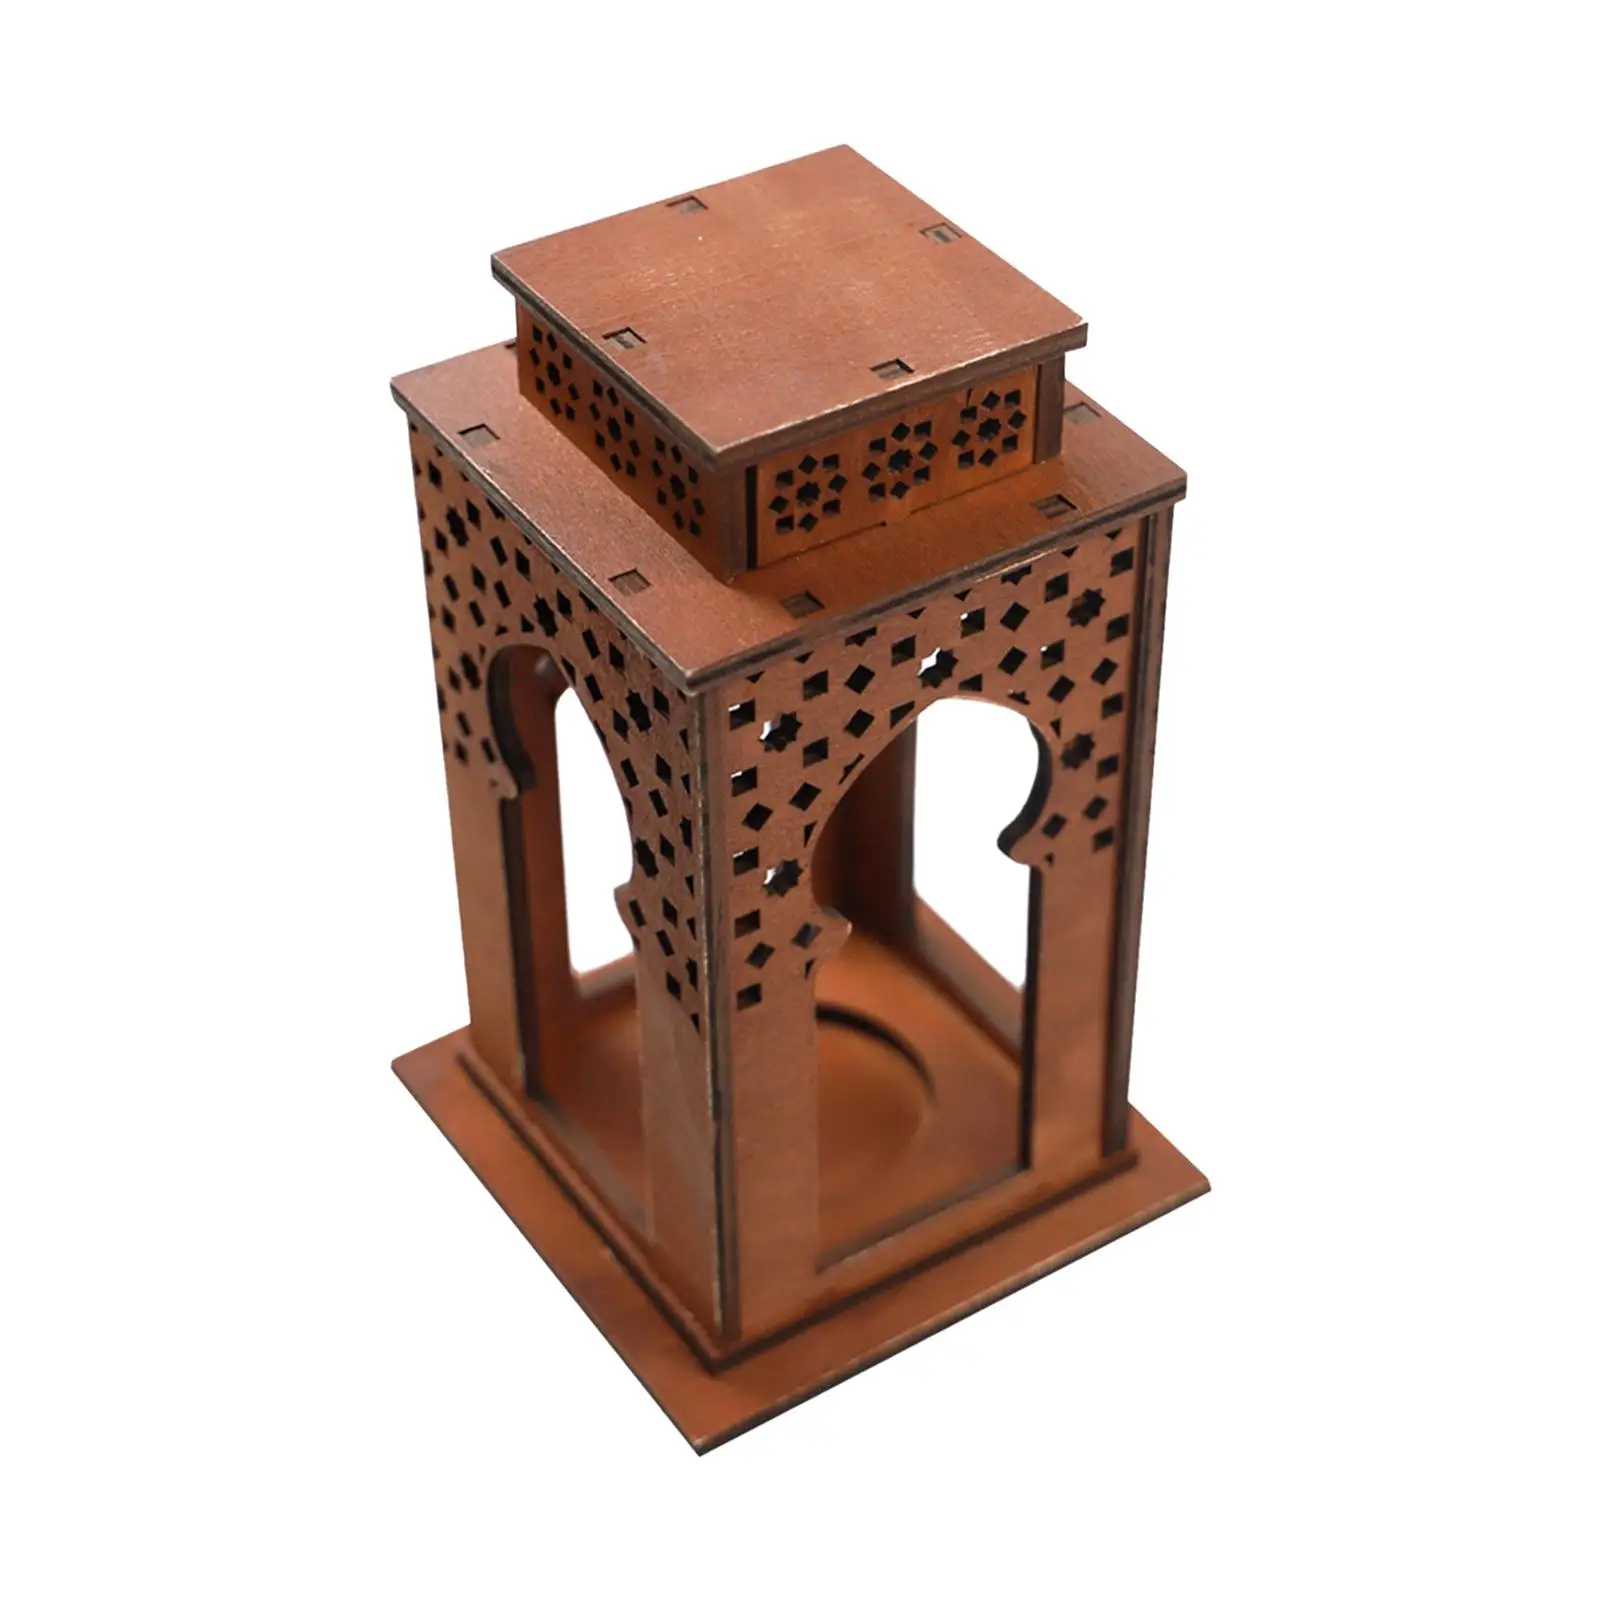 Candle Lantern Table Lantern Wooden Candle Holder Table Decoration for Indoor Outdoor